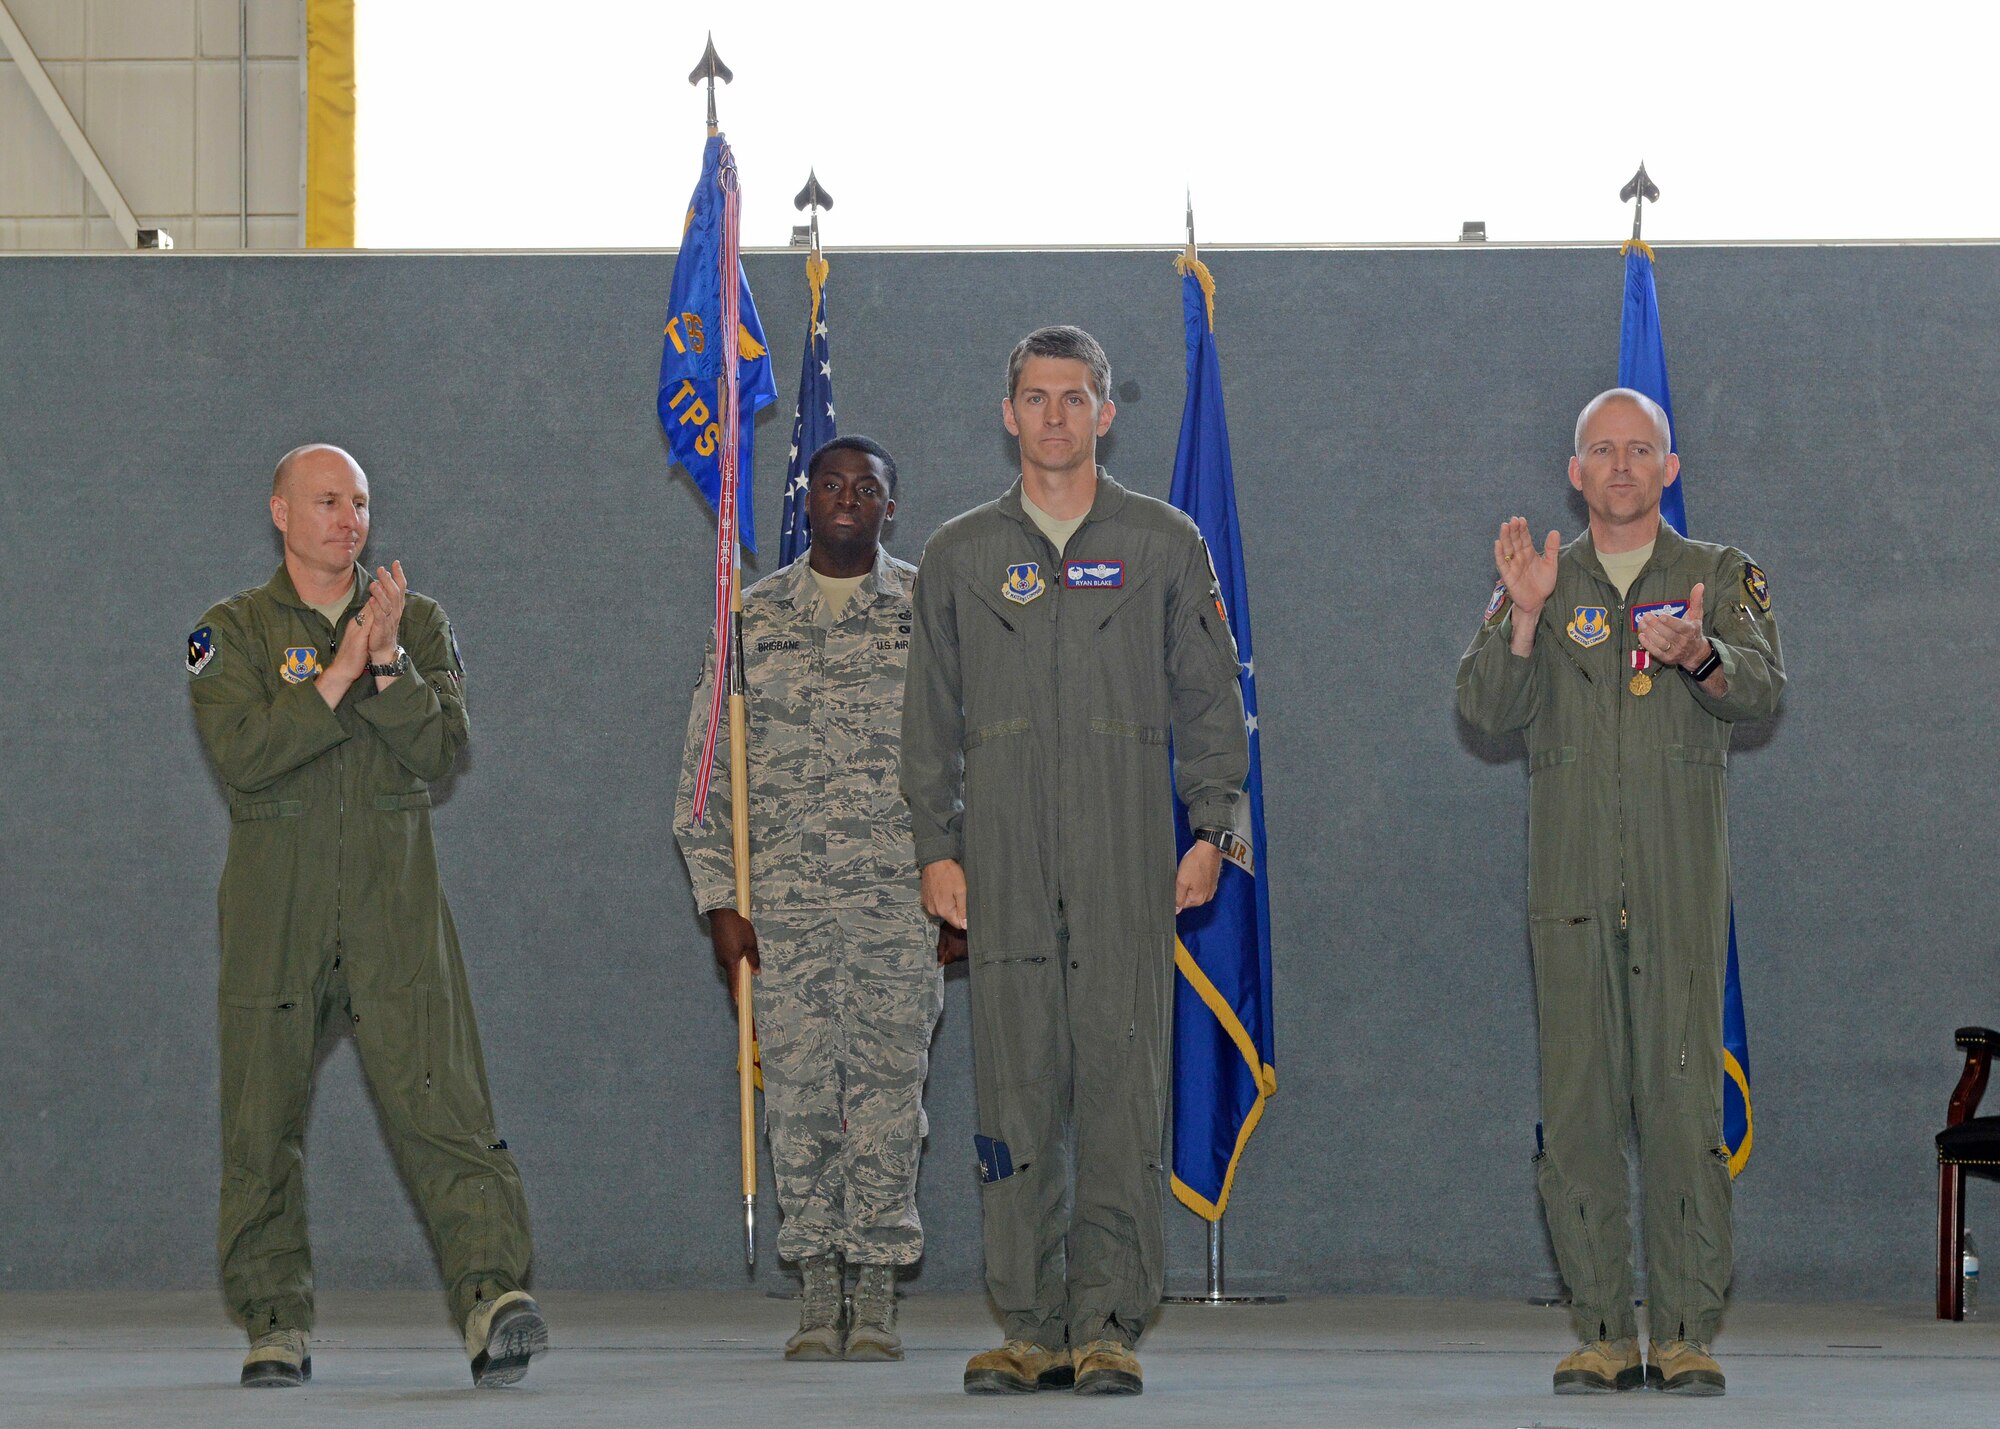 New U.S. Air Force Test Pilot School commandant Col. Ryan Blake (center) is flanked by Brig. Gen. Carl Schaefer, 412th Test Wing commander (left), and outgoing commandant, Col. Matthew Higer (right), during a change of command ceremony in Hangar 1207 July 10. (U.S. Air Force photo by Kenji Thuloweit)